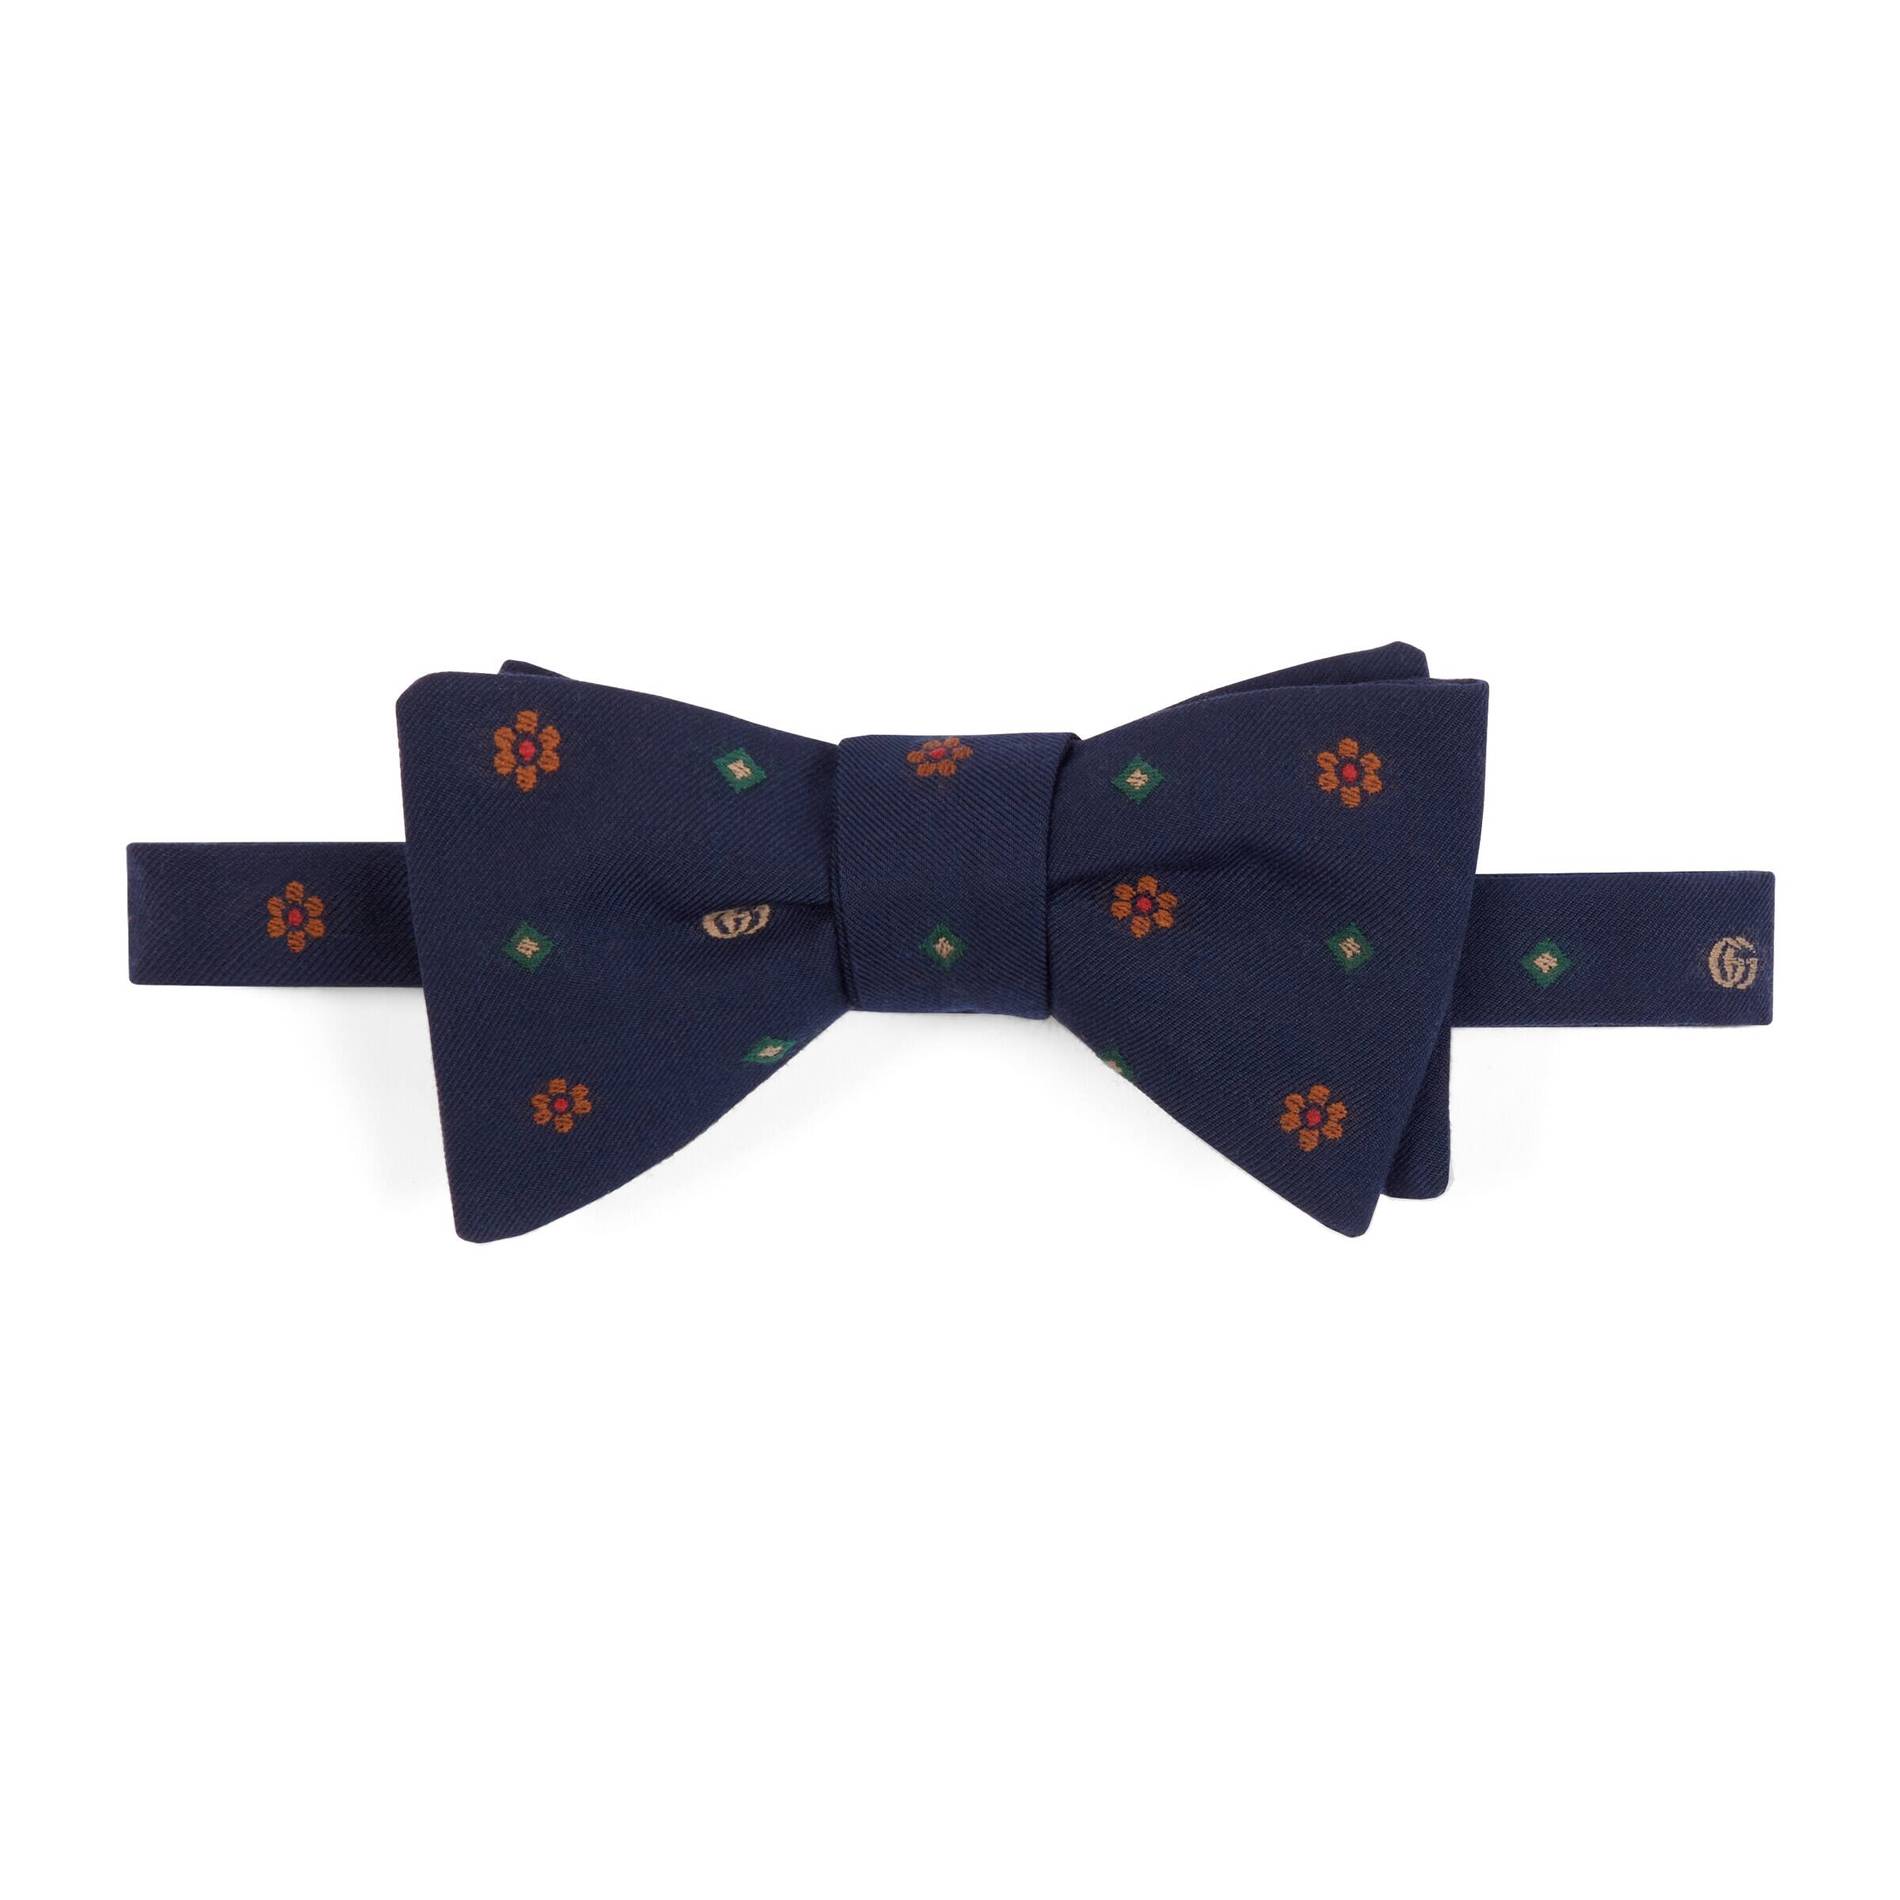 gift-guide-stocking-gucci-double-g-and-flowers-wool-bow-tie.jpg